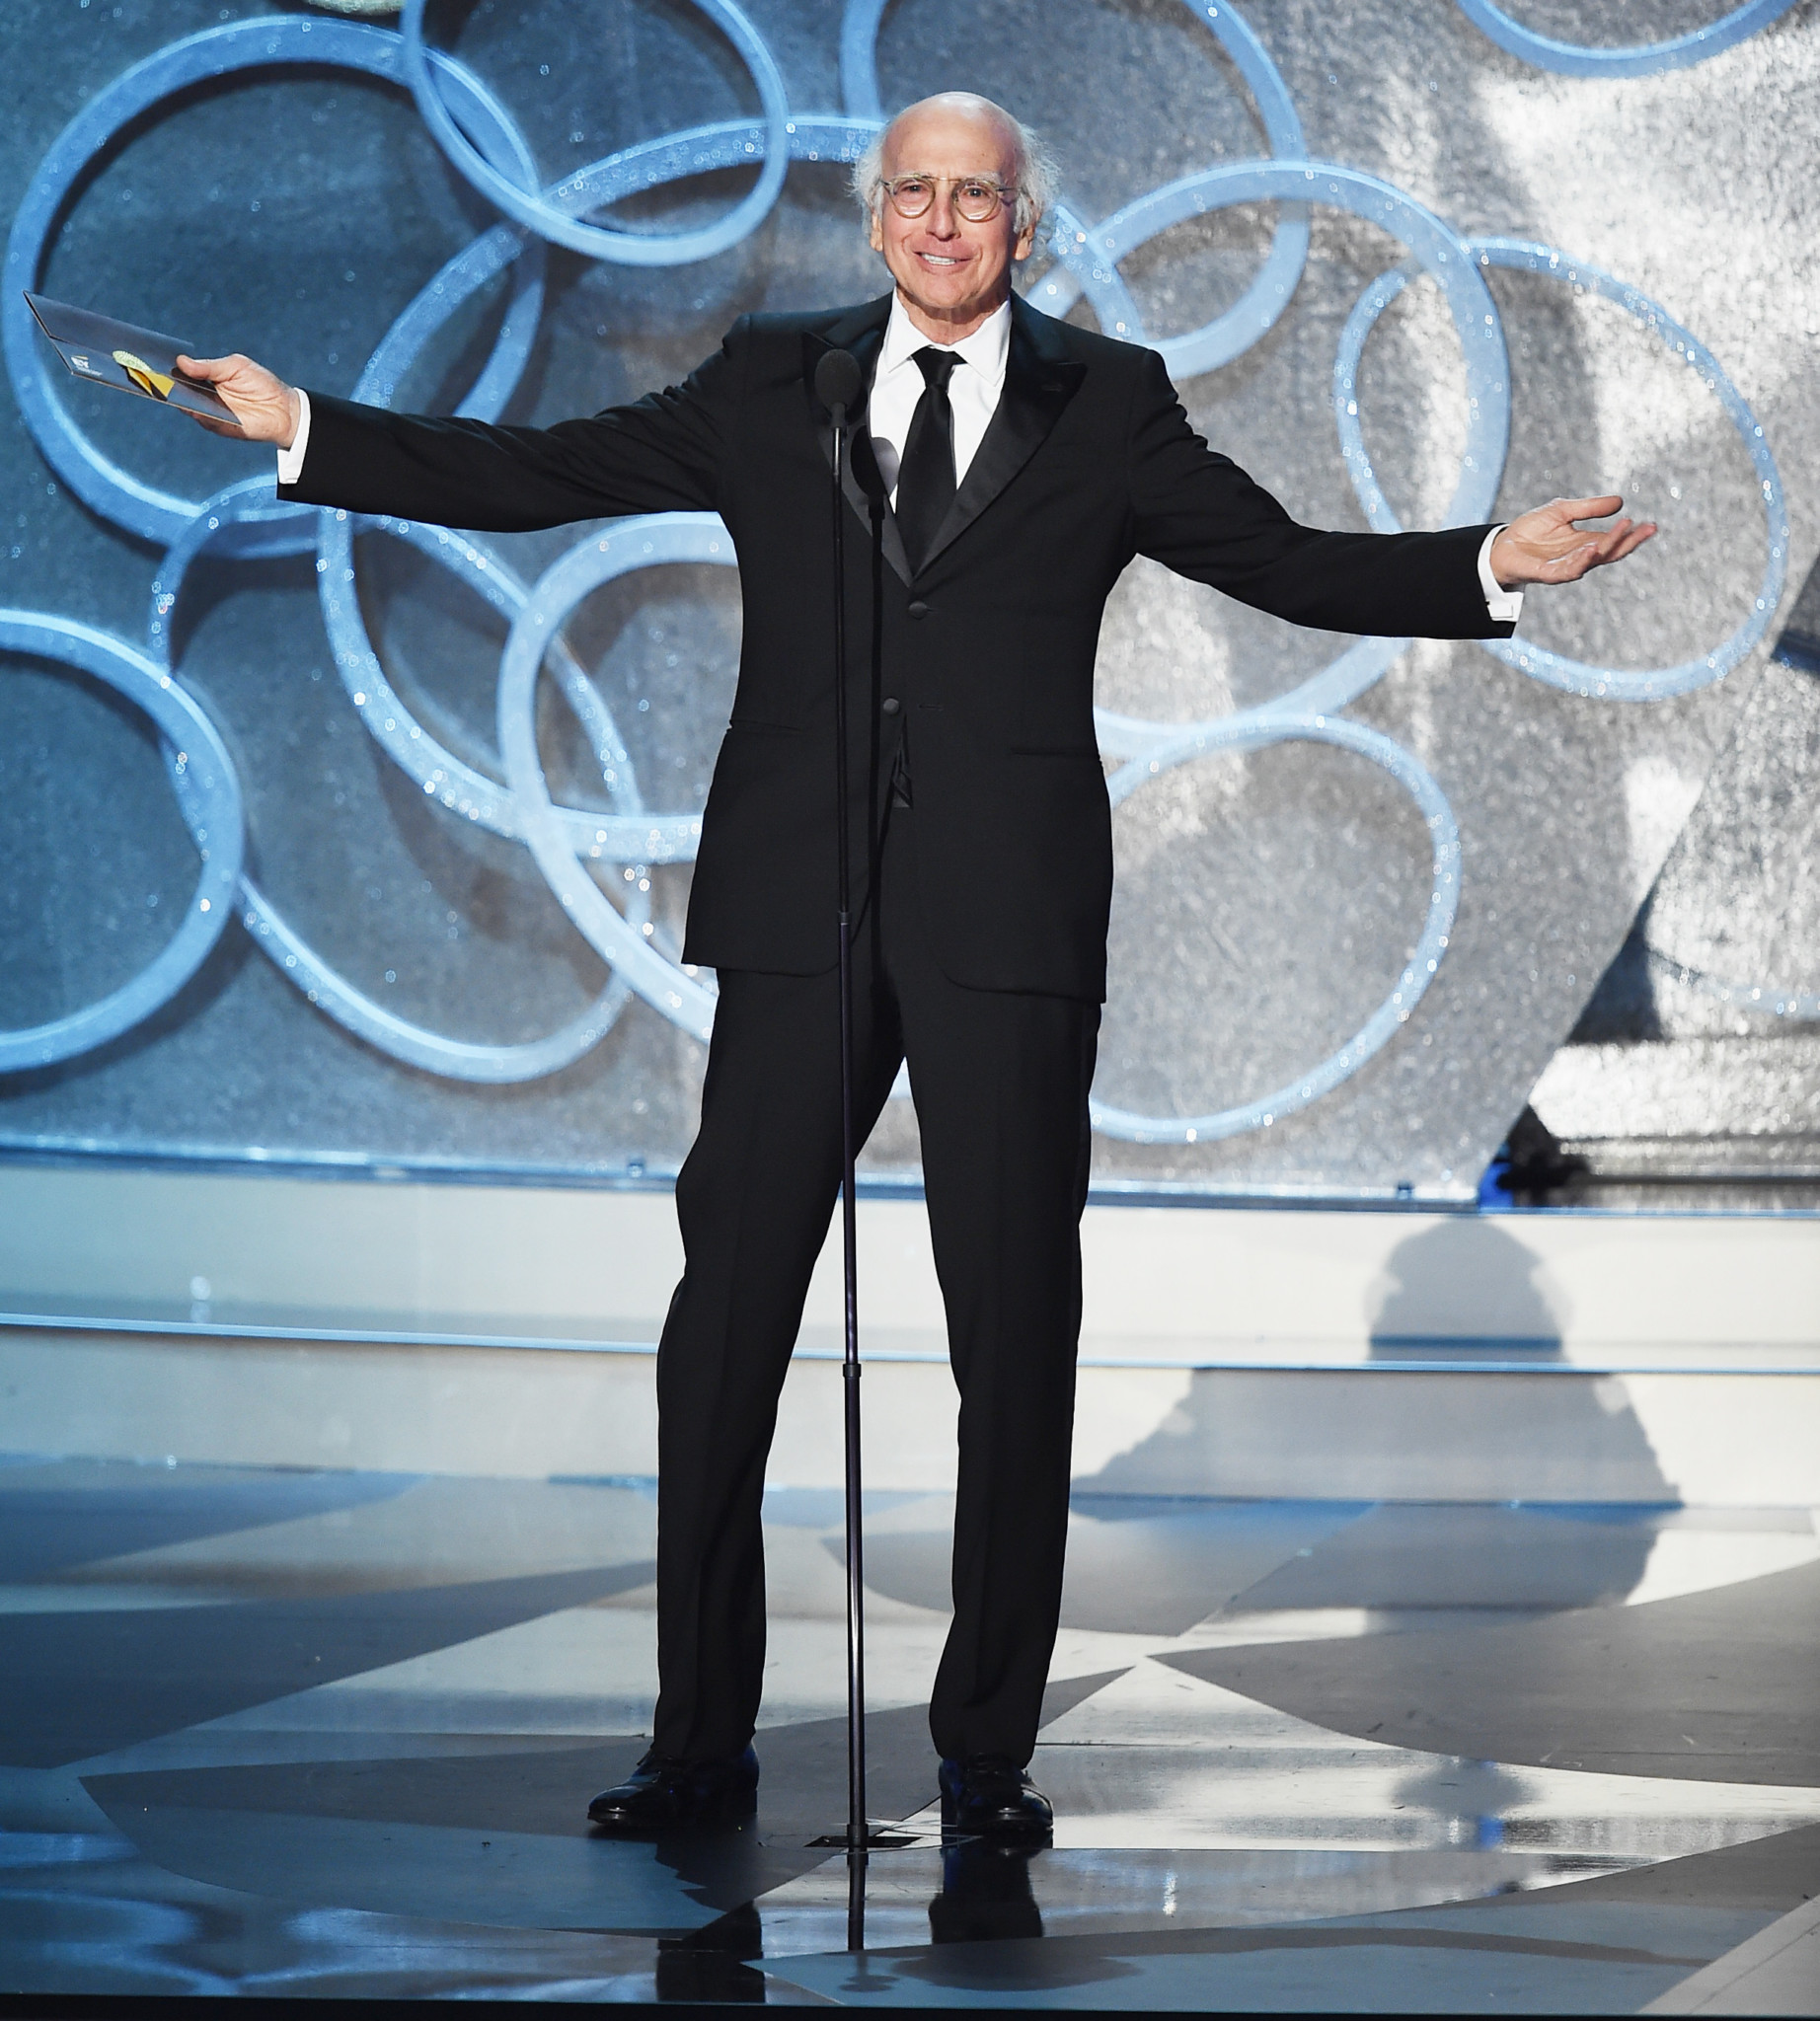 LOS ANGELES, CA - SEPTEMBER 18: Actor/writer Larry David speaks onstage during the 68th Annual Primetime Emmy Awards at Microsoft Theater on September 18, 2016 in Los Angeles, California. (Photo by Kevin Winter/Getty Images)